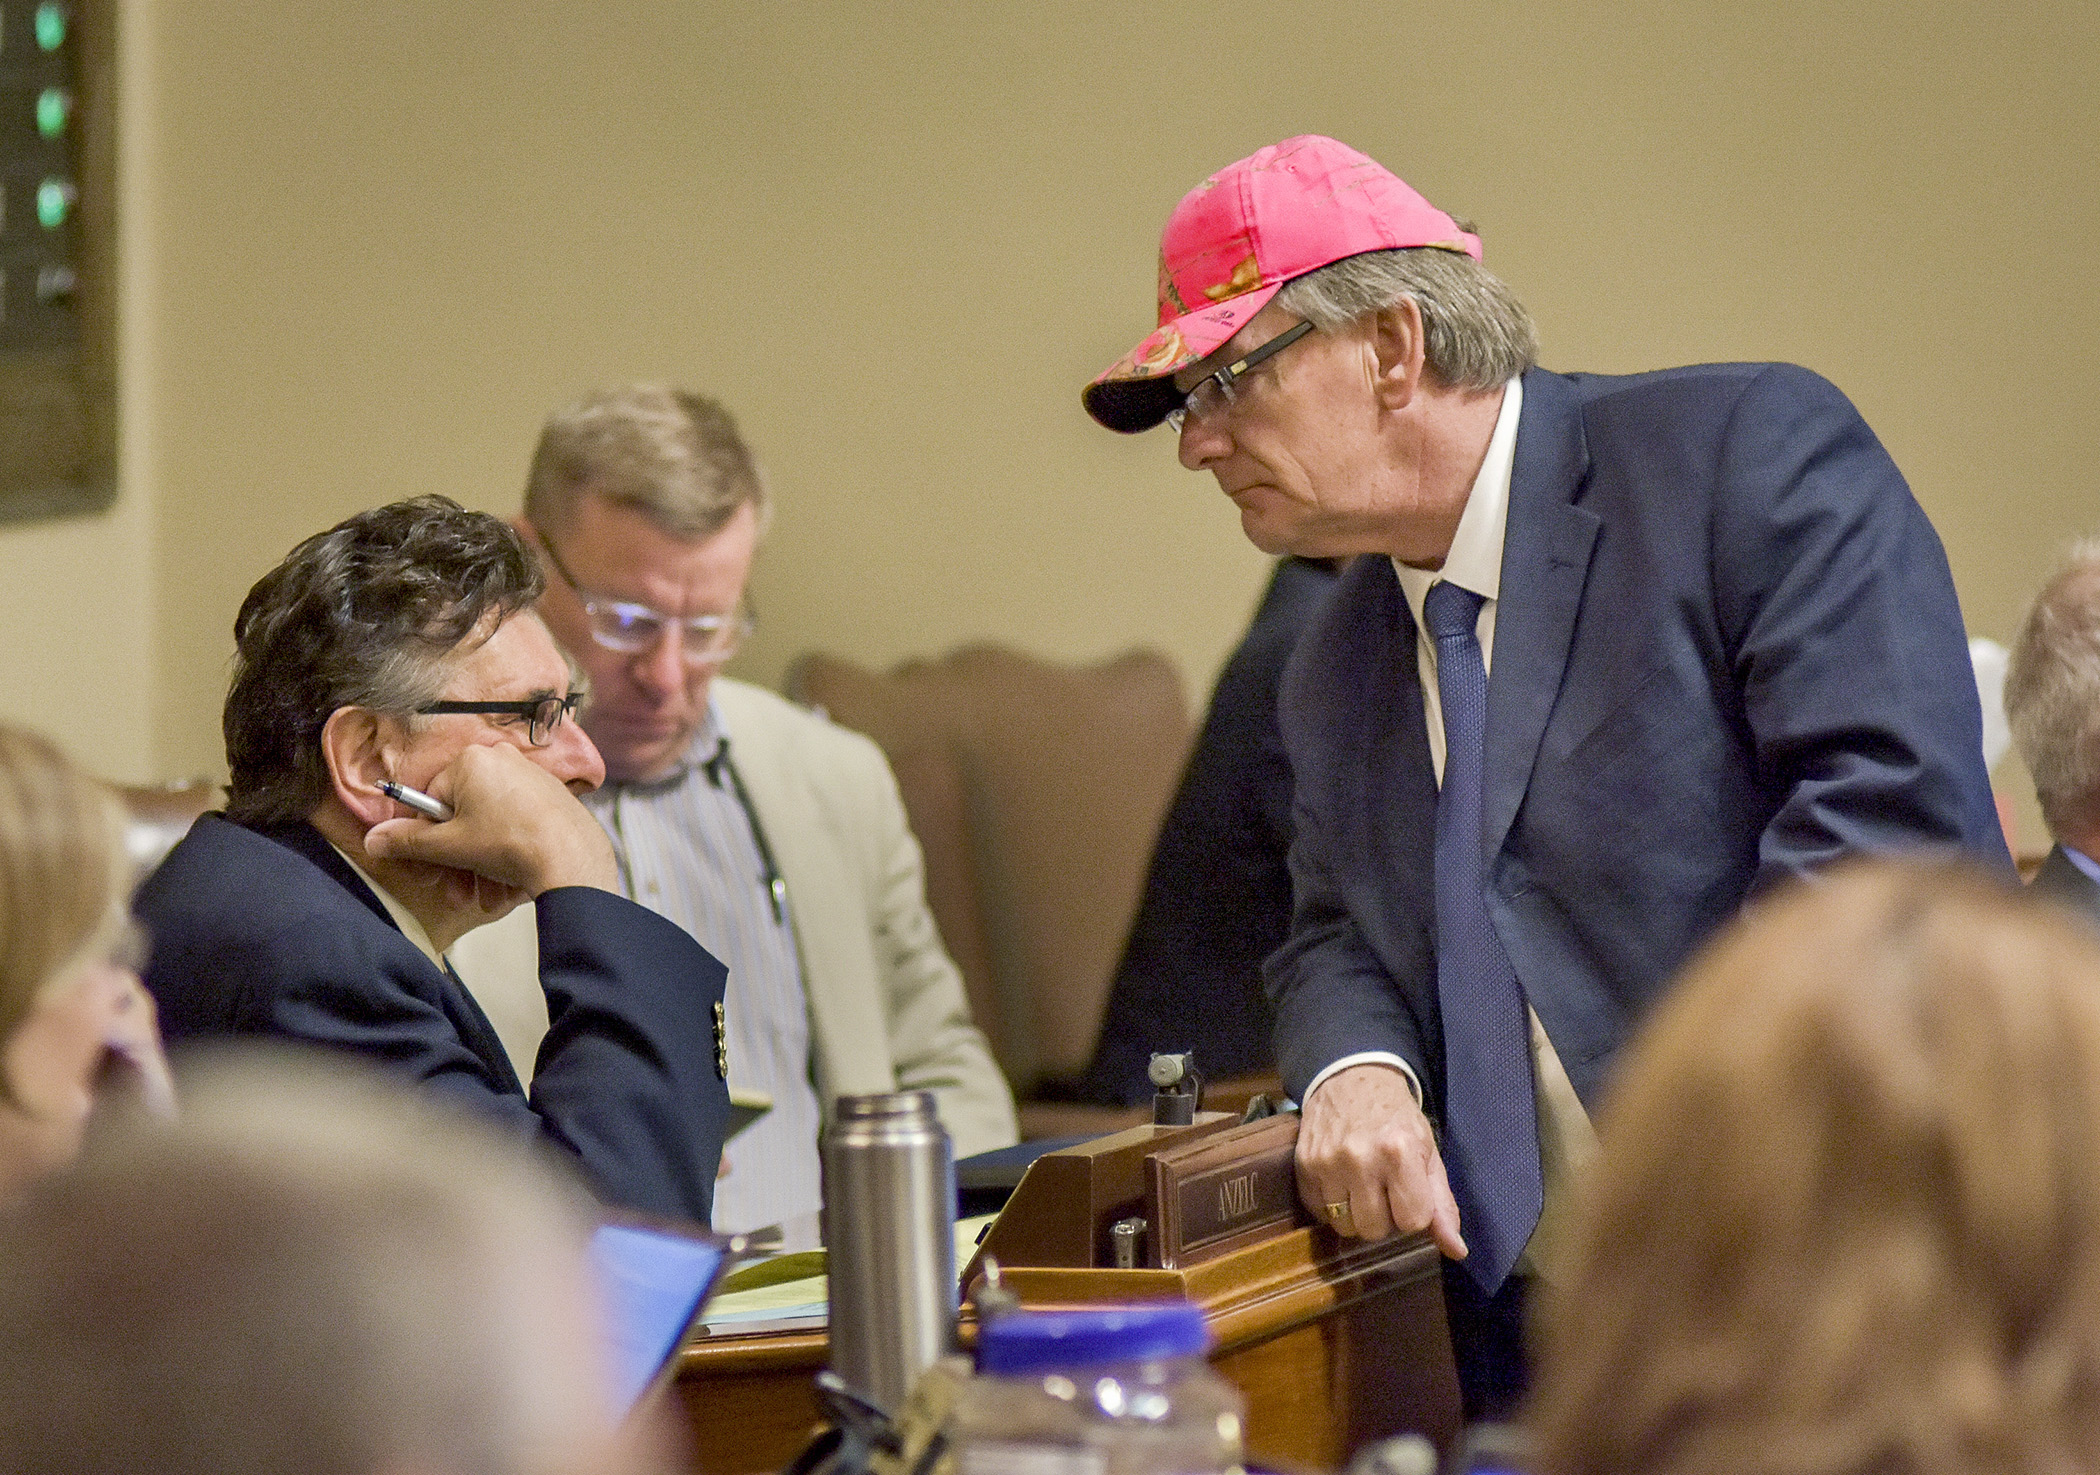 Donning a blaze pink hat, Rep Tom Hackbarth confers with Rep. Tom Anzelc during a recess May 18.  Minutes prior, the House passed a bill Hackbarth sponsors that would make it legal for hunters to wear blaze pink, in addition to blaze orange. Photo by Andrew VonBank